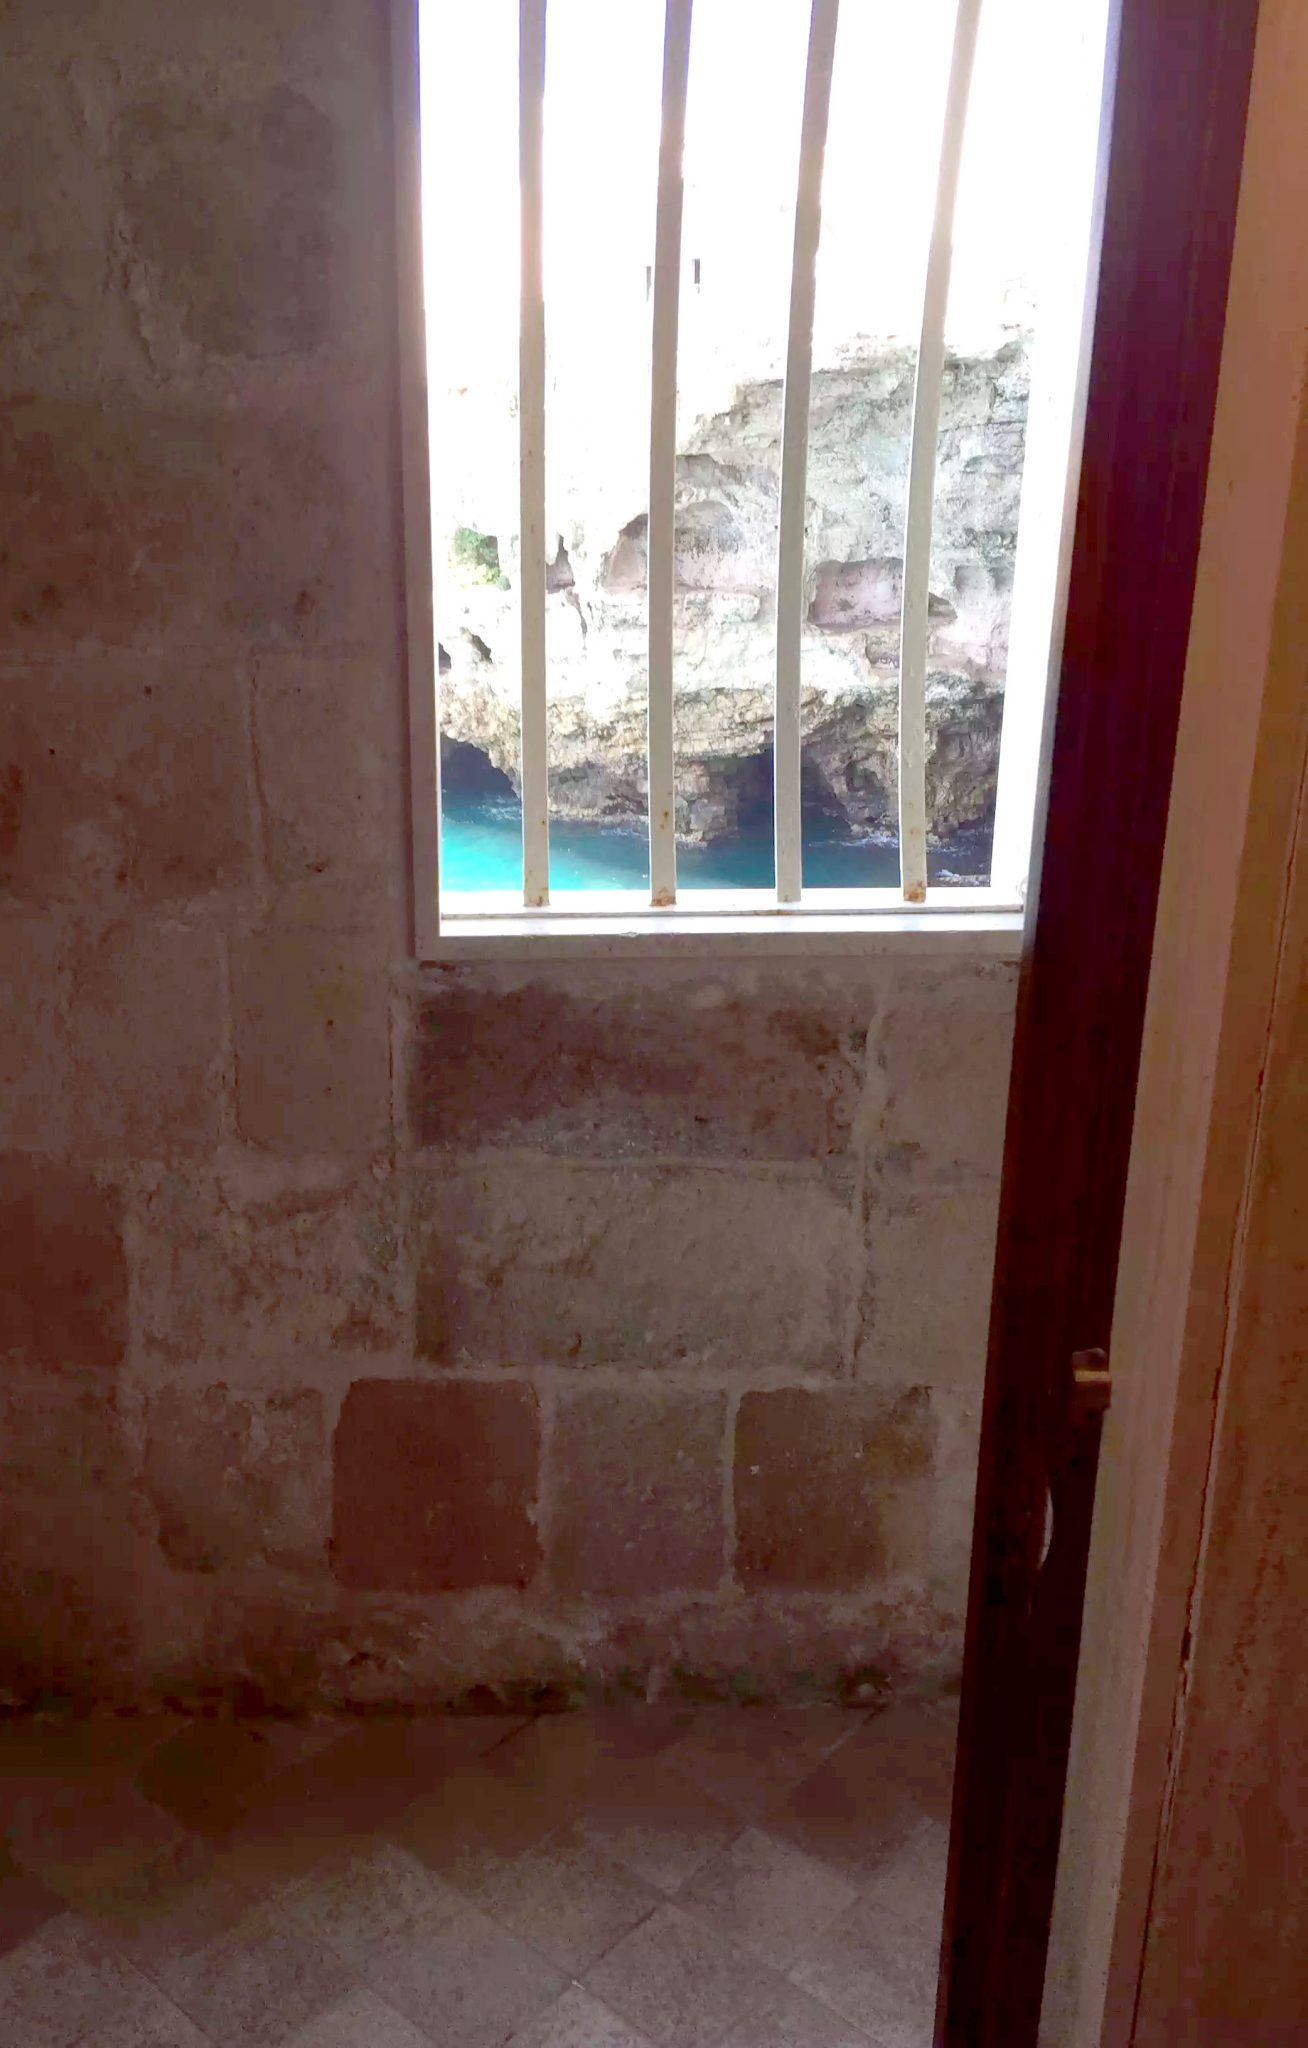 Polignano A Mare Puglia Italy Grotta Palazzese lunch Birthday Princess cave Restaurant View Loo